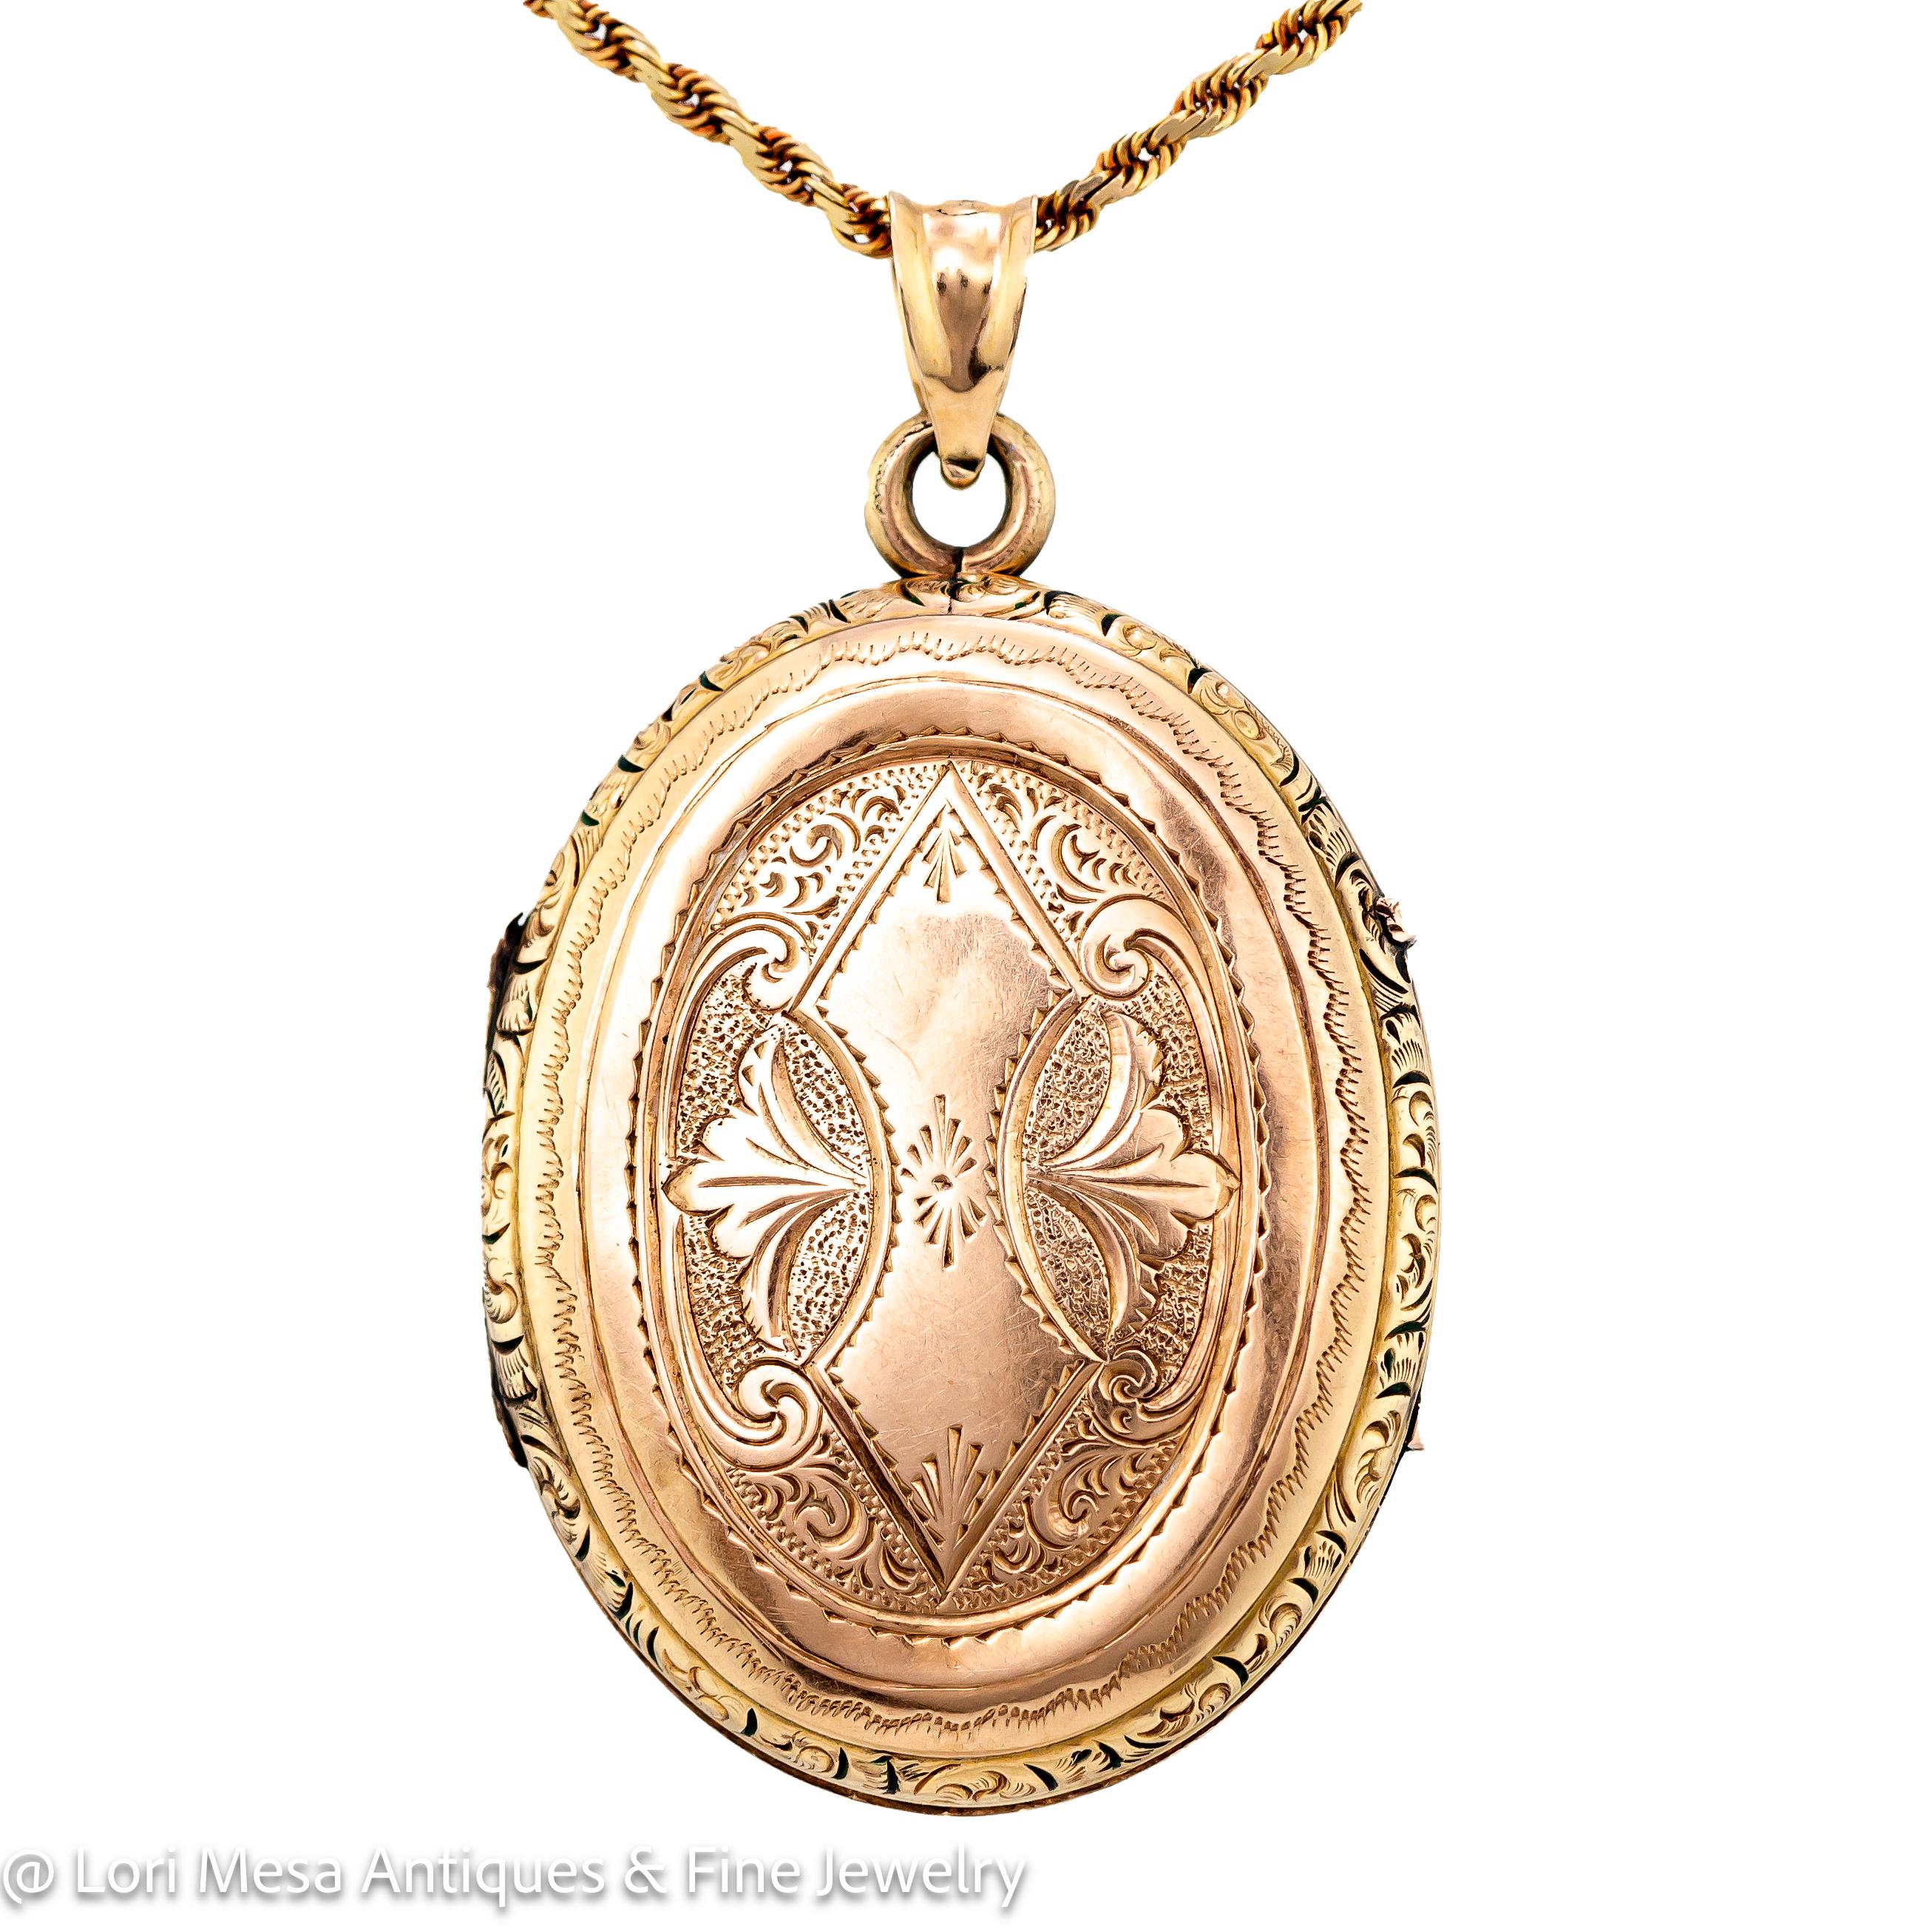 This exquisite antique Victorian locket is not just a stunning piece of jewelry, but also a piece of history. Made of 14kt yellow gold and crafted around 1885, it is a testament to the craftsmanship of the era. The locket's oval shape and finely